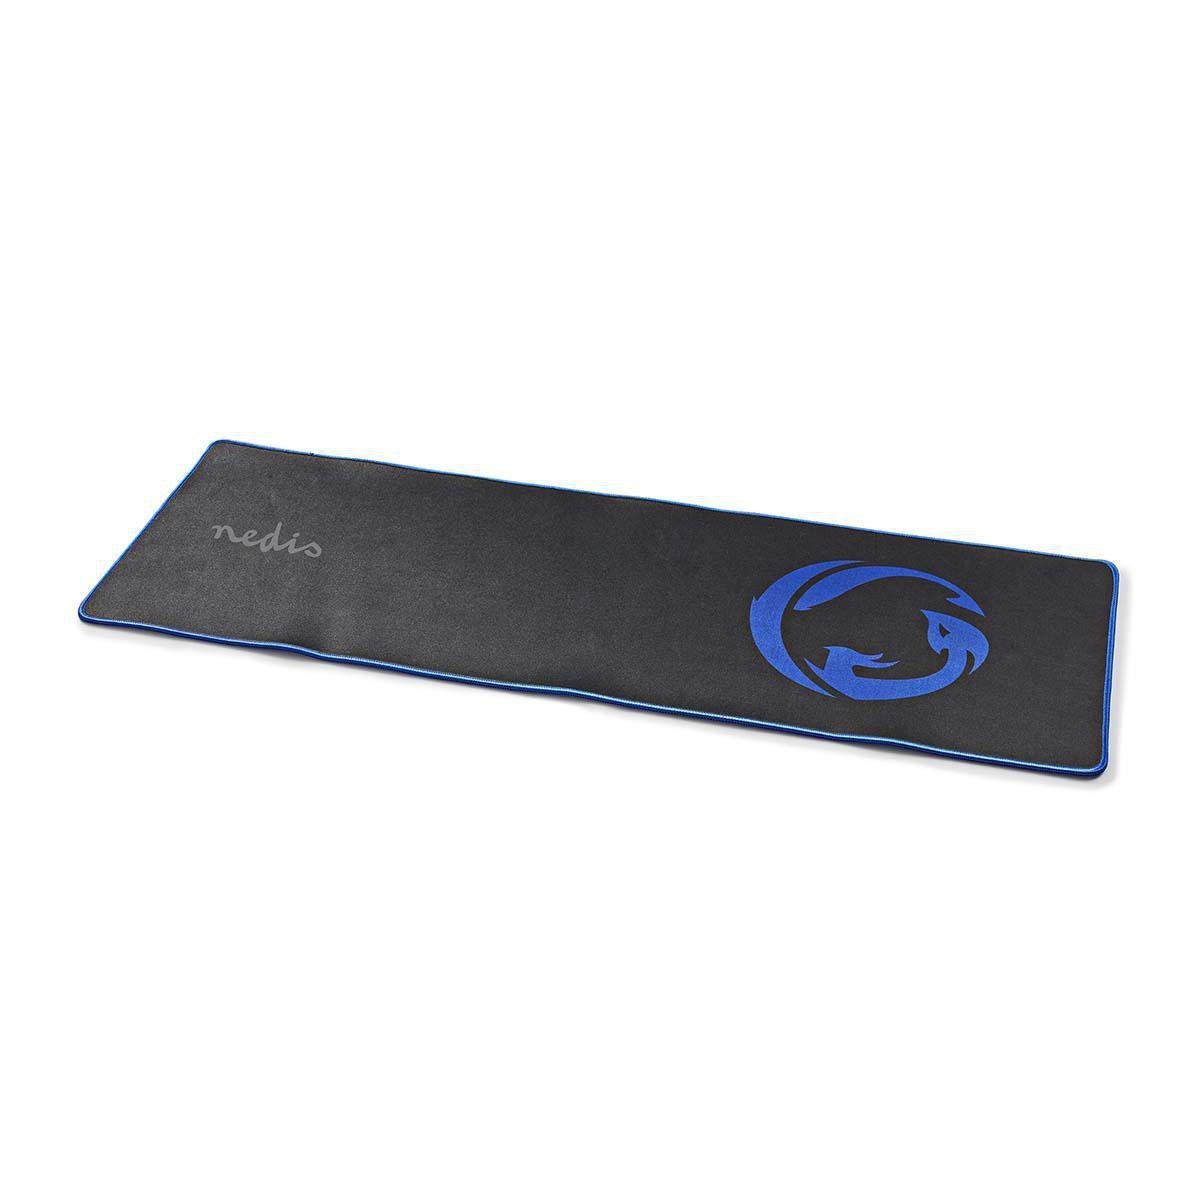 Gaming Mouse Pad Anti-Skid and Waterproof Base 920 x 294mm